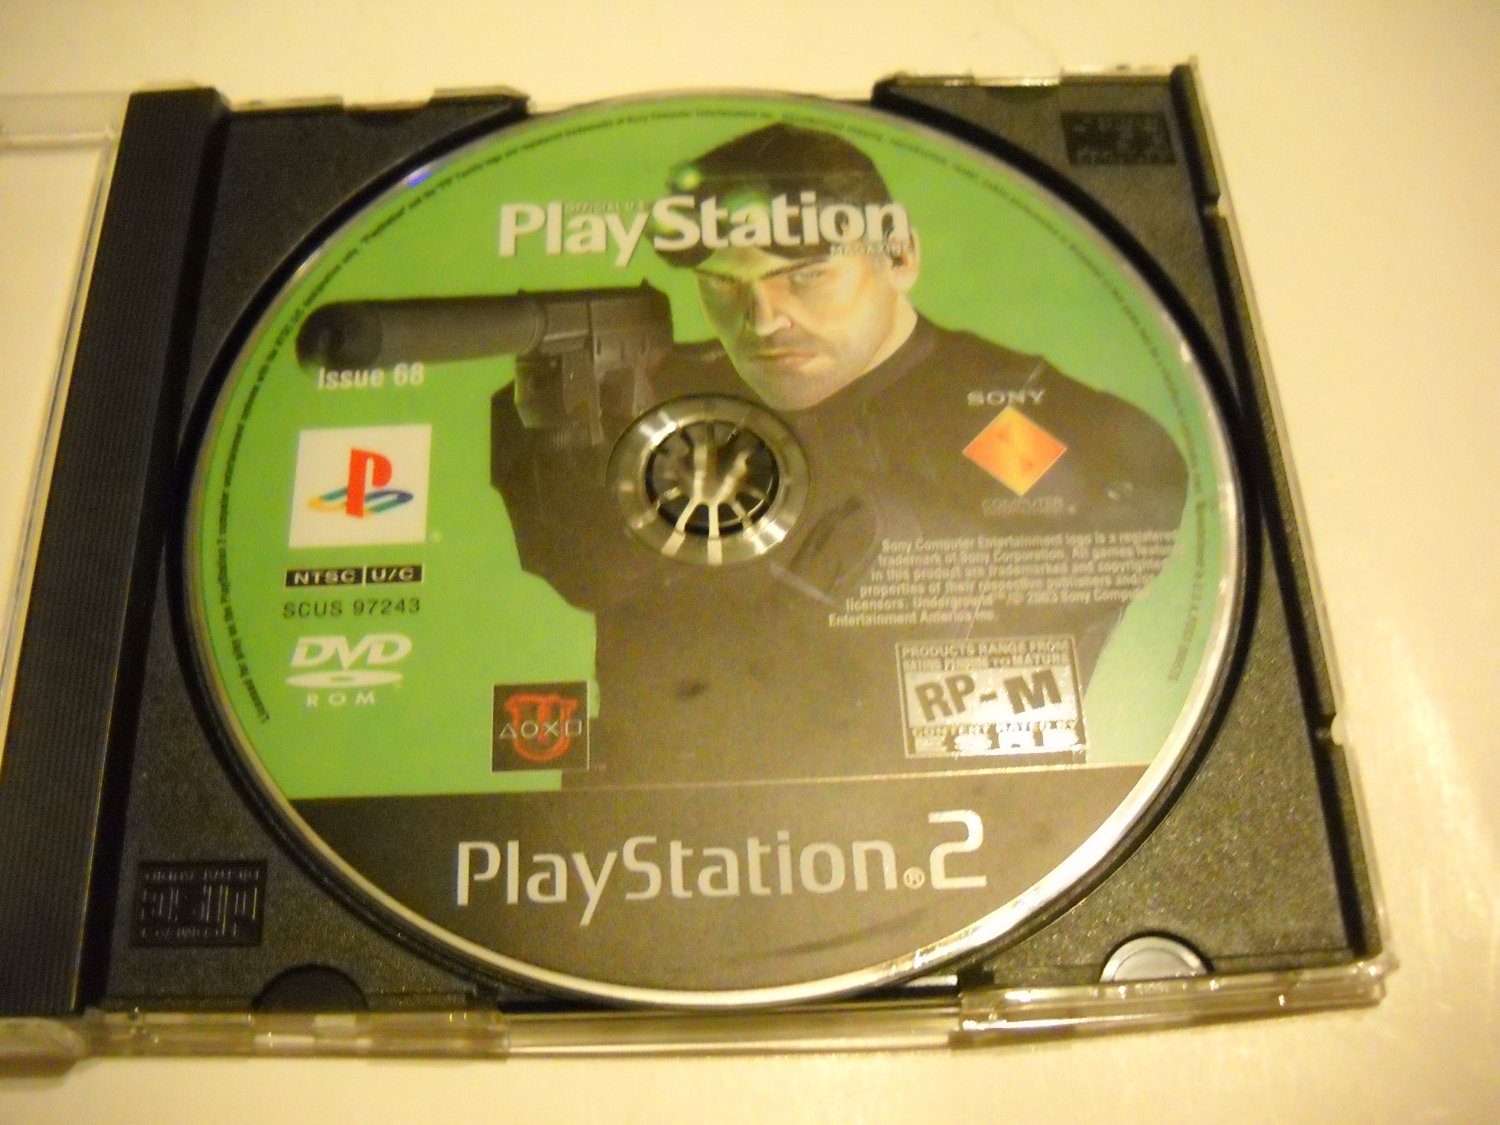 Official U.S. Playstation Magazine Demo Disc Issue 68 Ps21500 x 1125